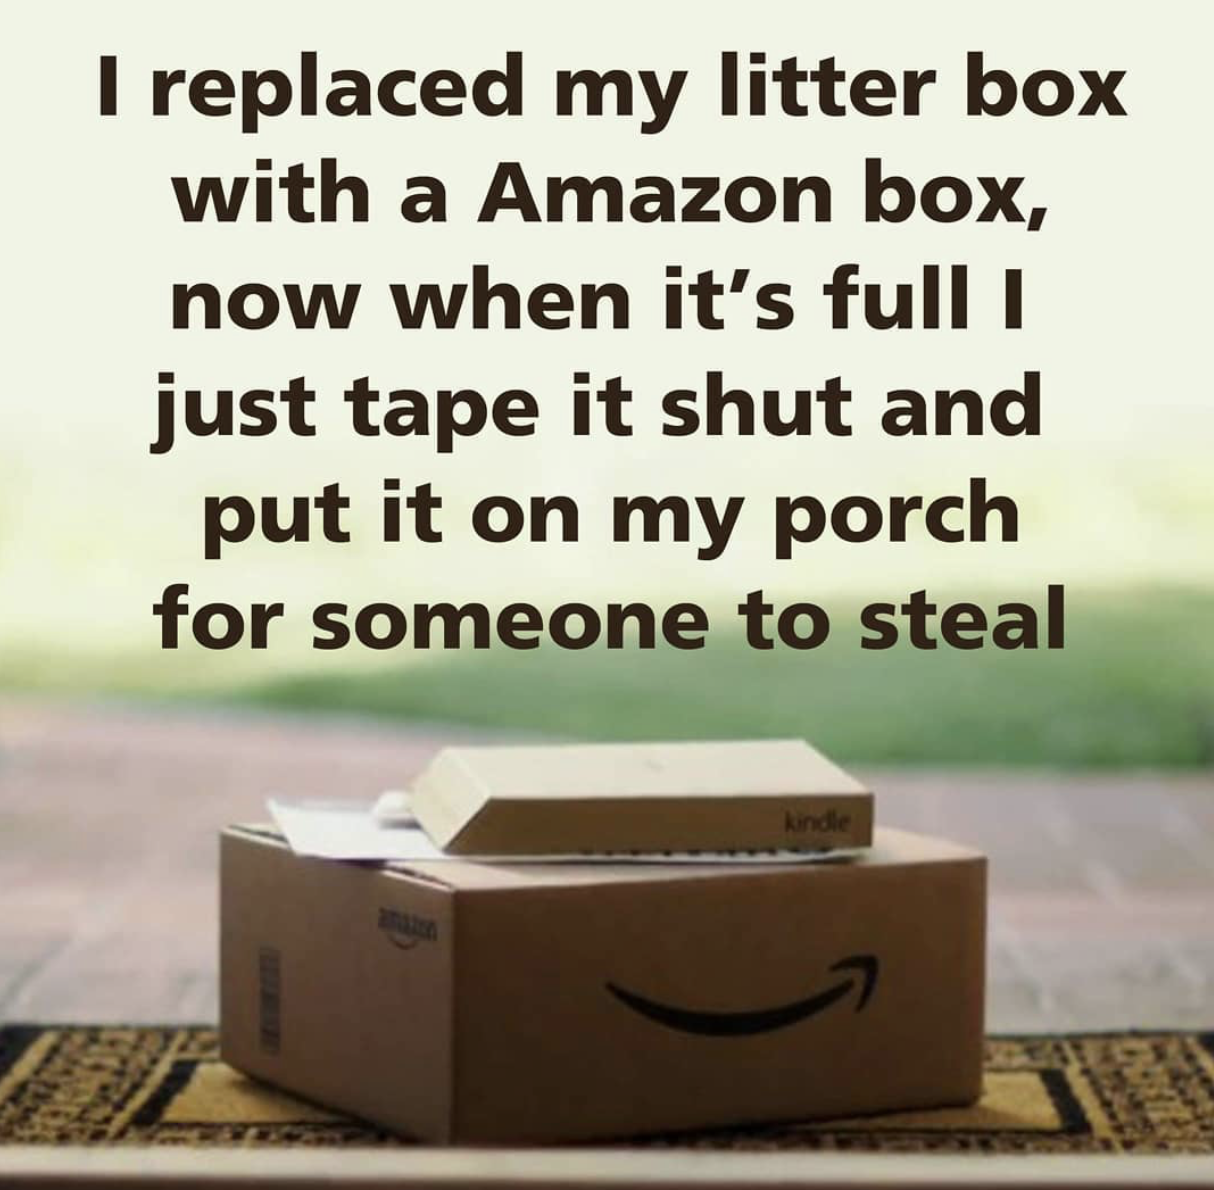 I replaced my litter box with a Amazon box, now when it's full i just tape it shut and put it on my porch for someone to steal